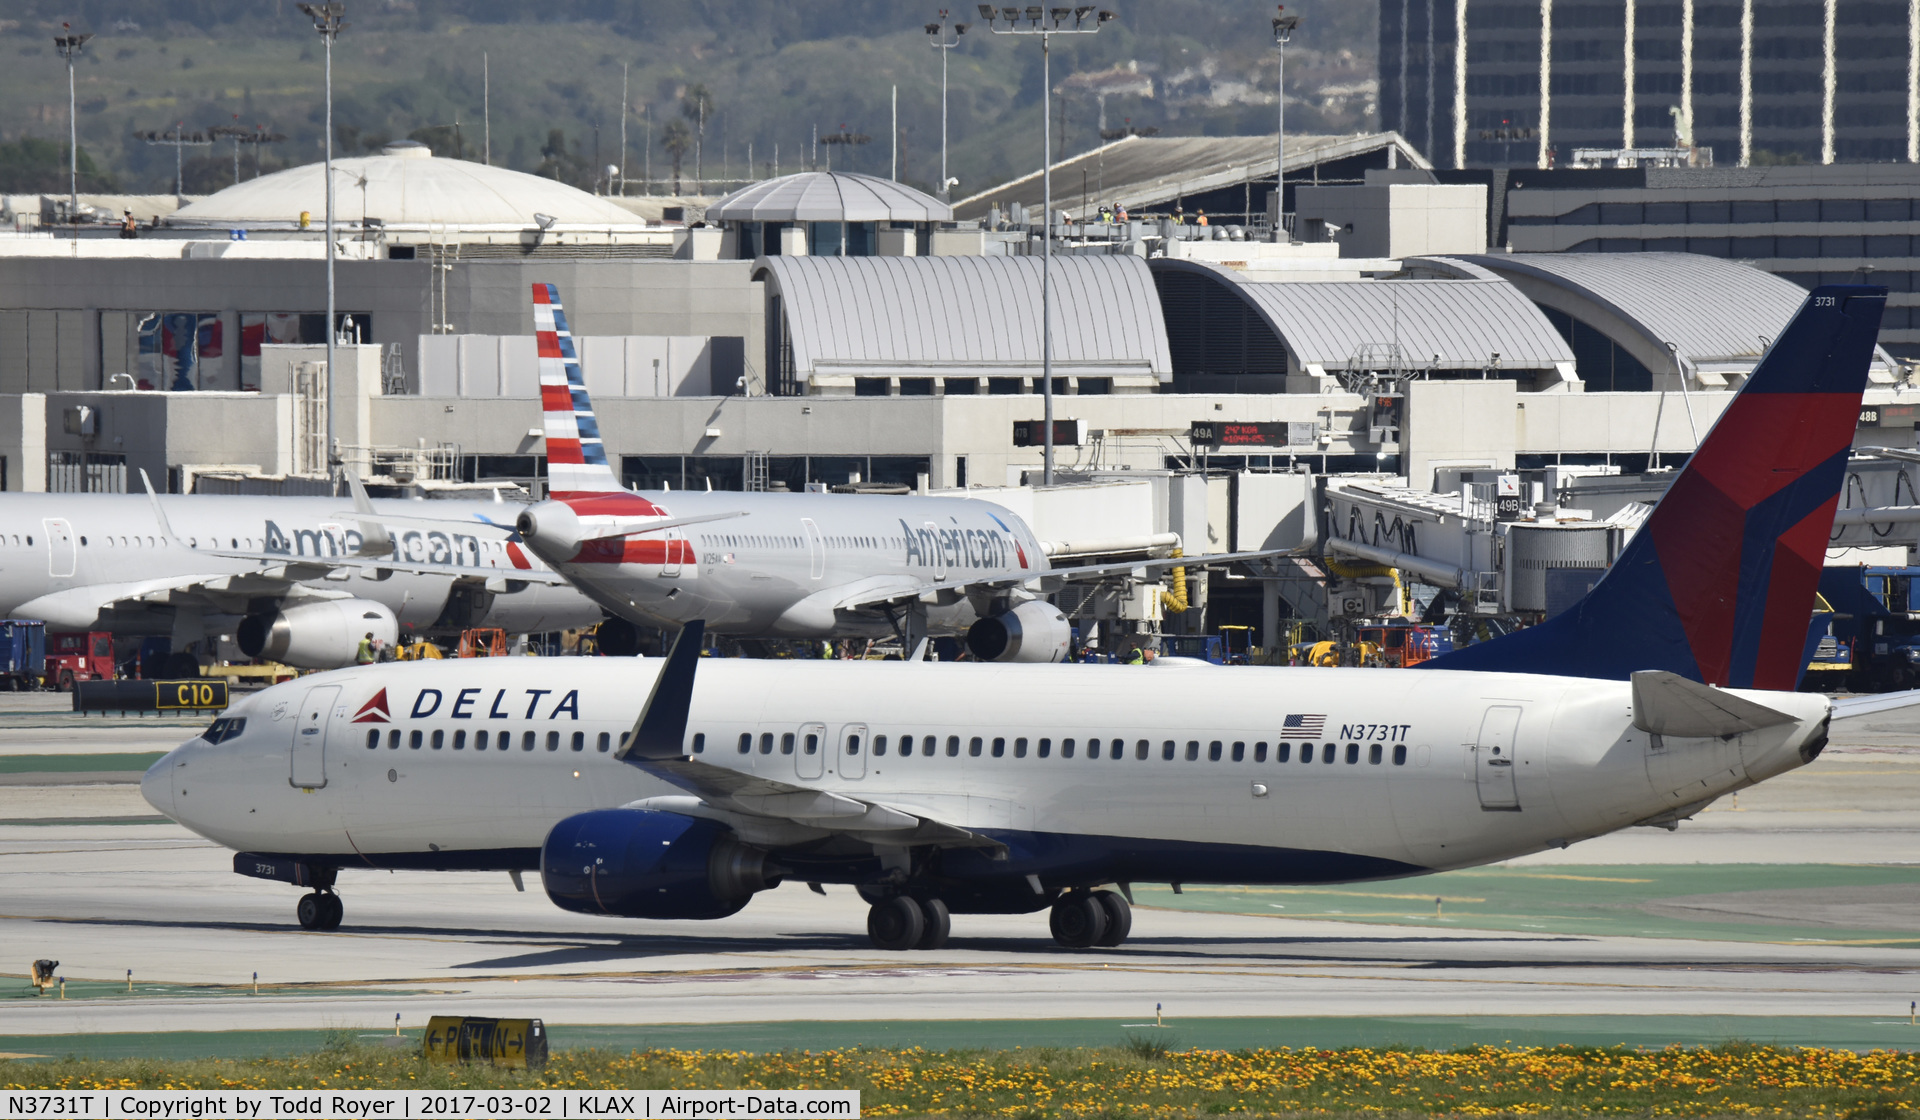 N3731T, 2000 Boeing 737-832 C/N 30775, Arrived at LAX on 25L